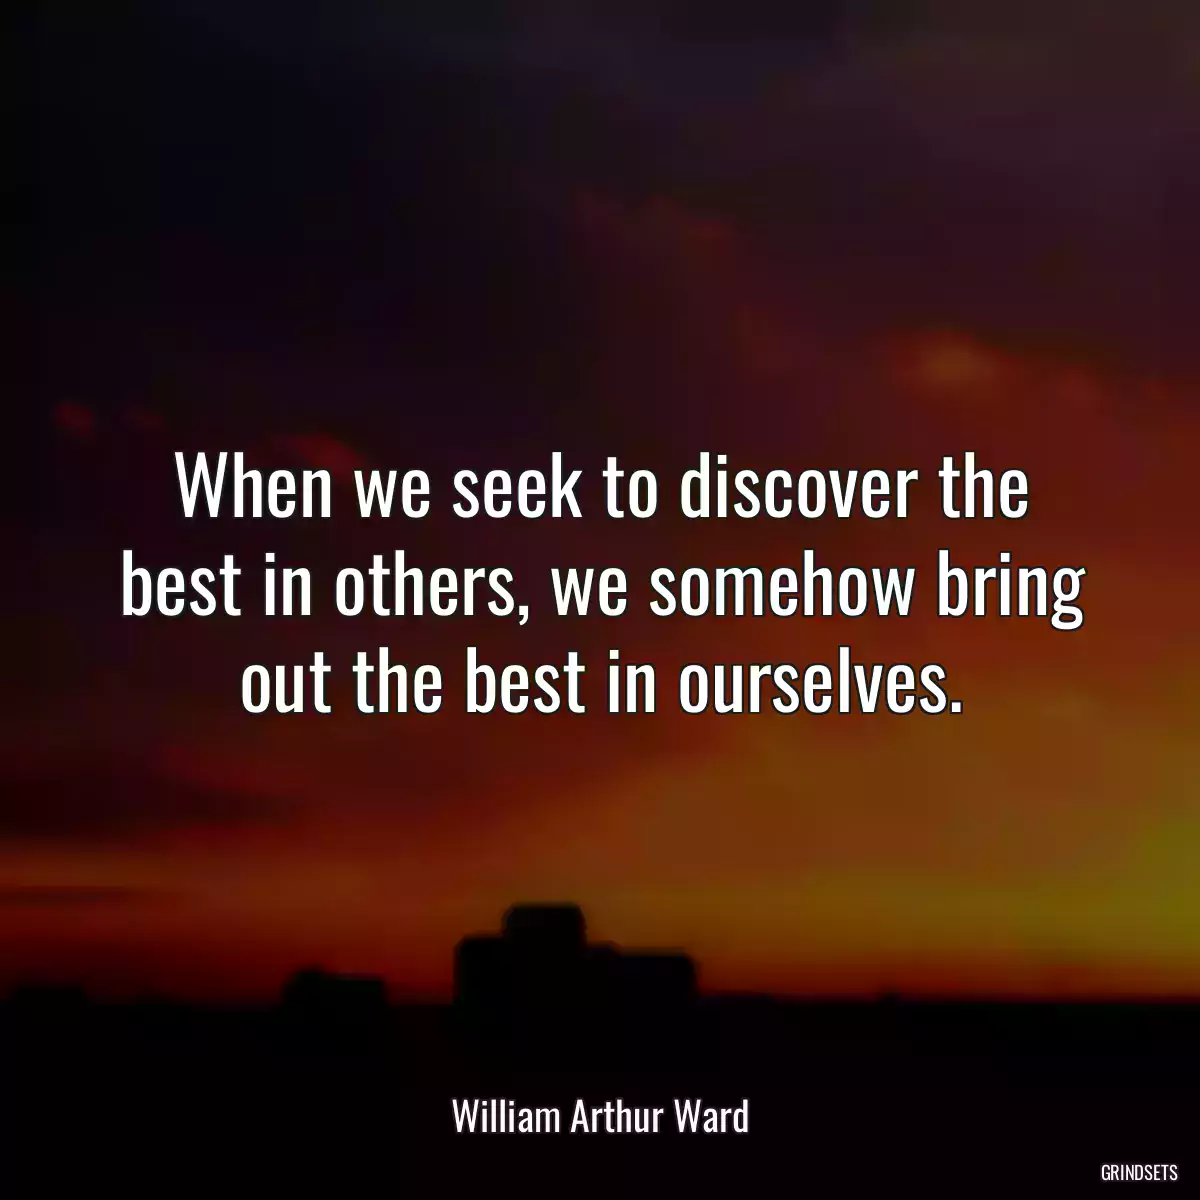 When we seek to discover the best in others, we somehow bring out the best in ourselves.